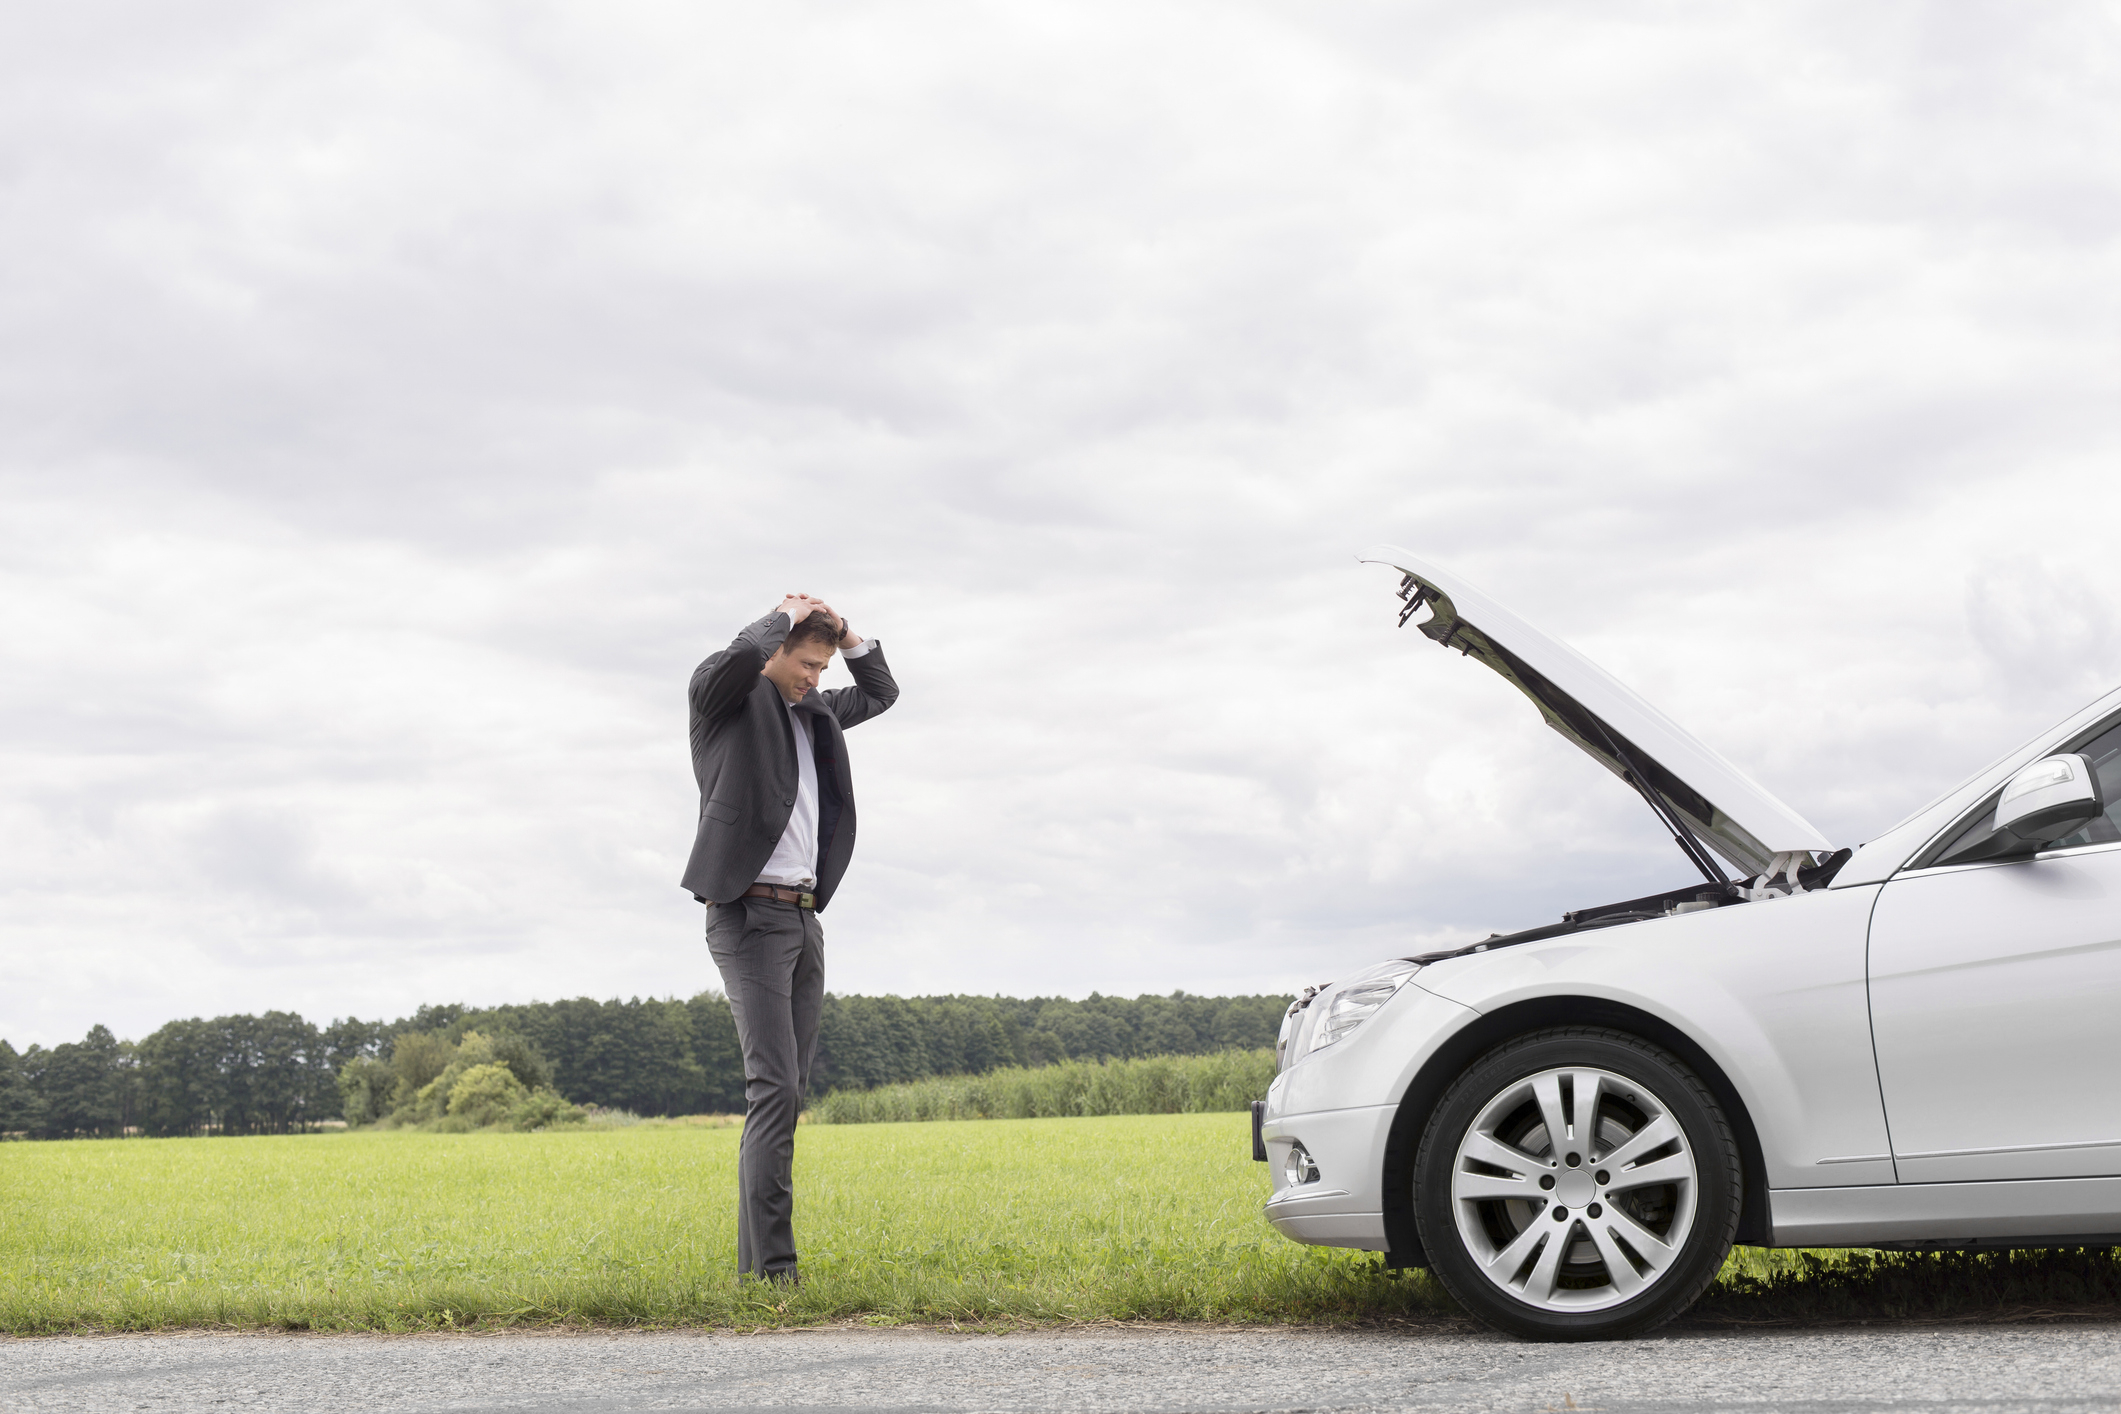 A man in a suit stands on the side of the road with his hands on his head, looking at the open hood of a broken-down car in a rural area